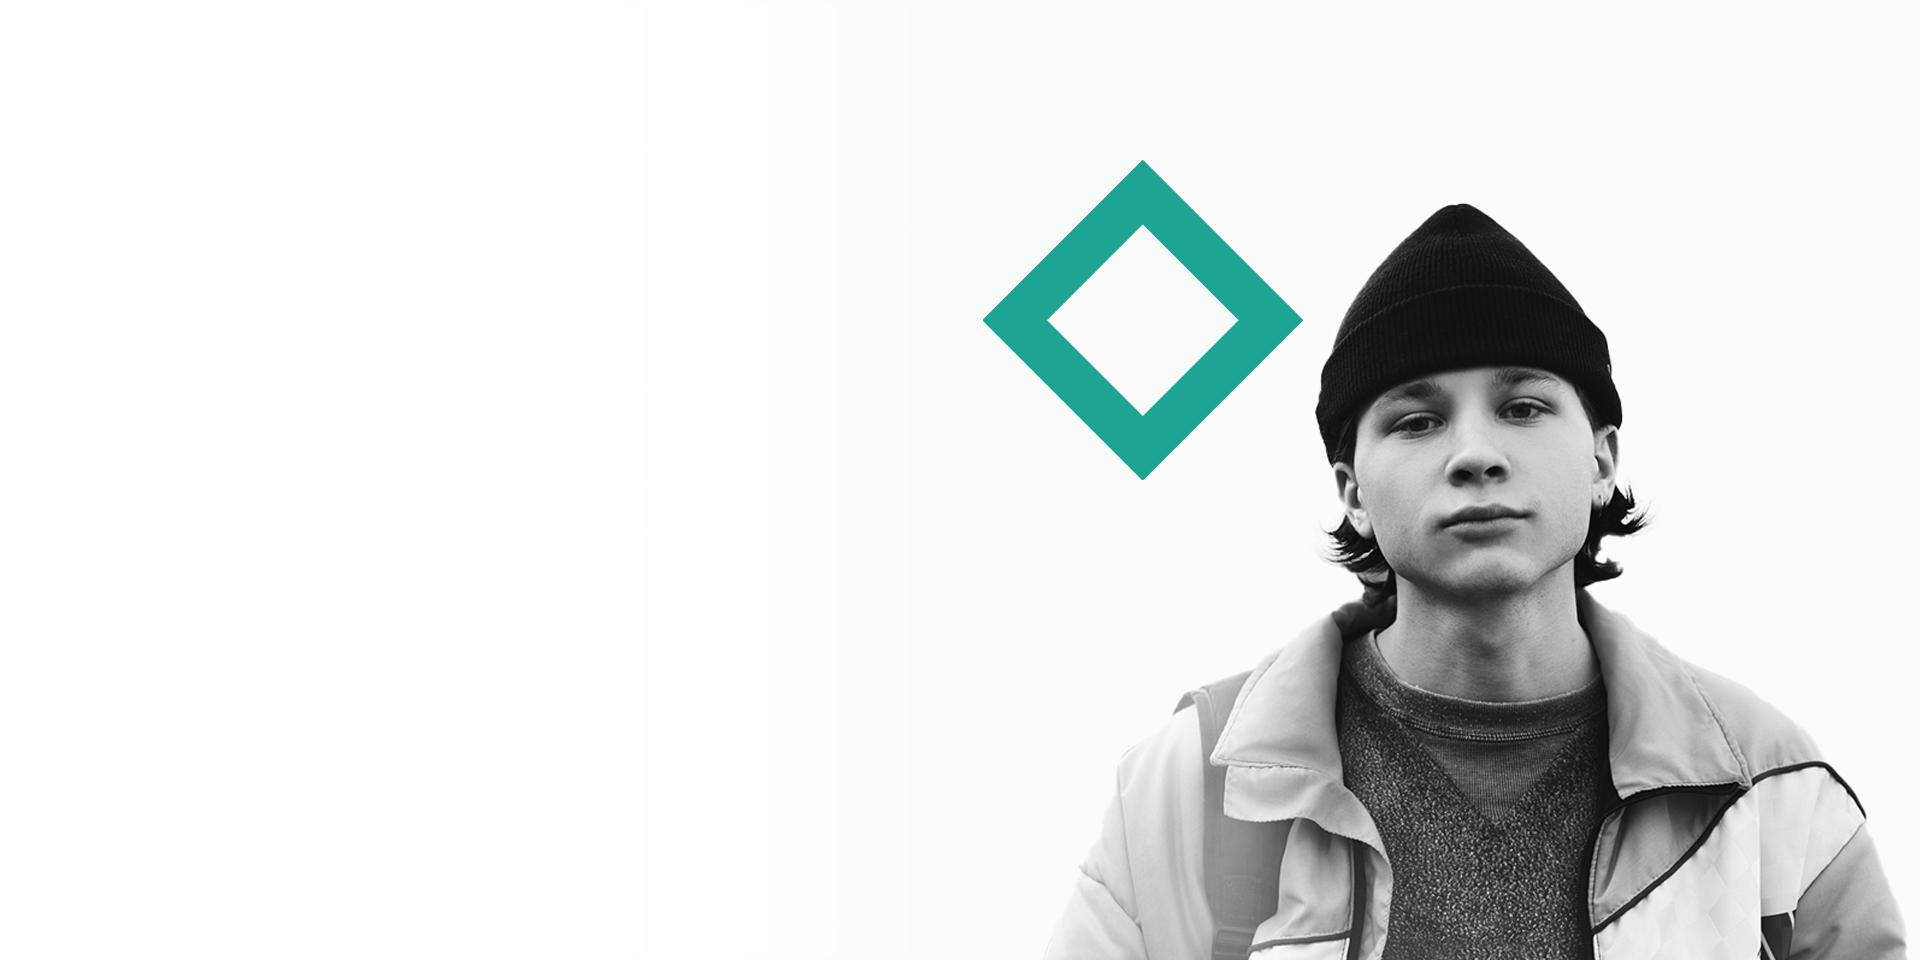   A young man in casual clothes poses in front of a stylised teal diamond logo